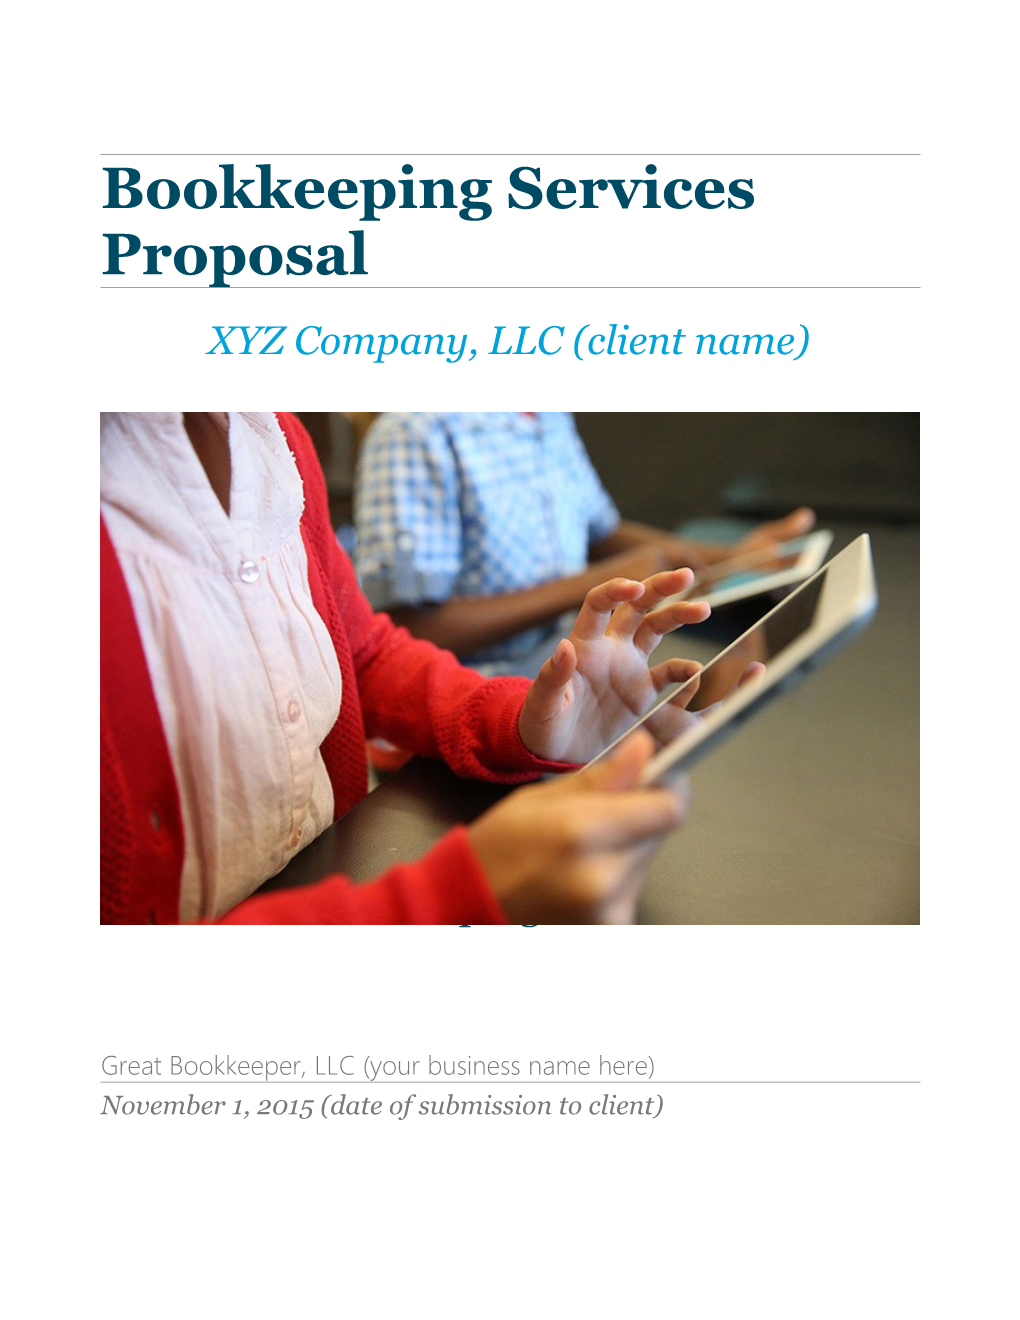 Great Bookkeeper, LLC (Your Business Name Here)